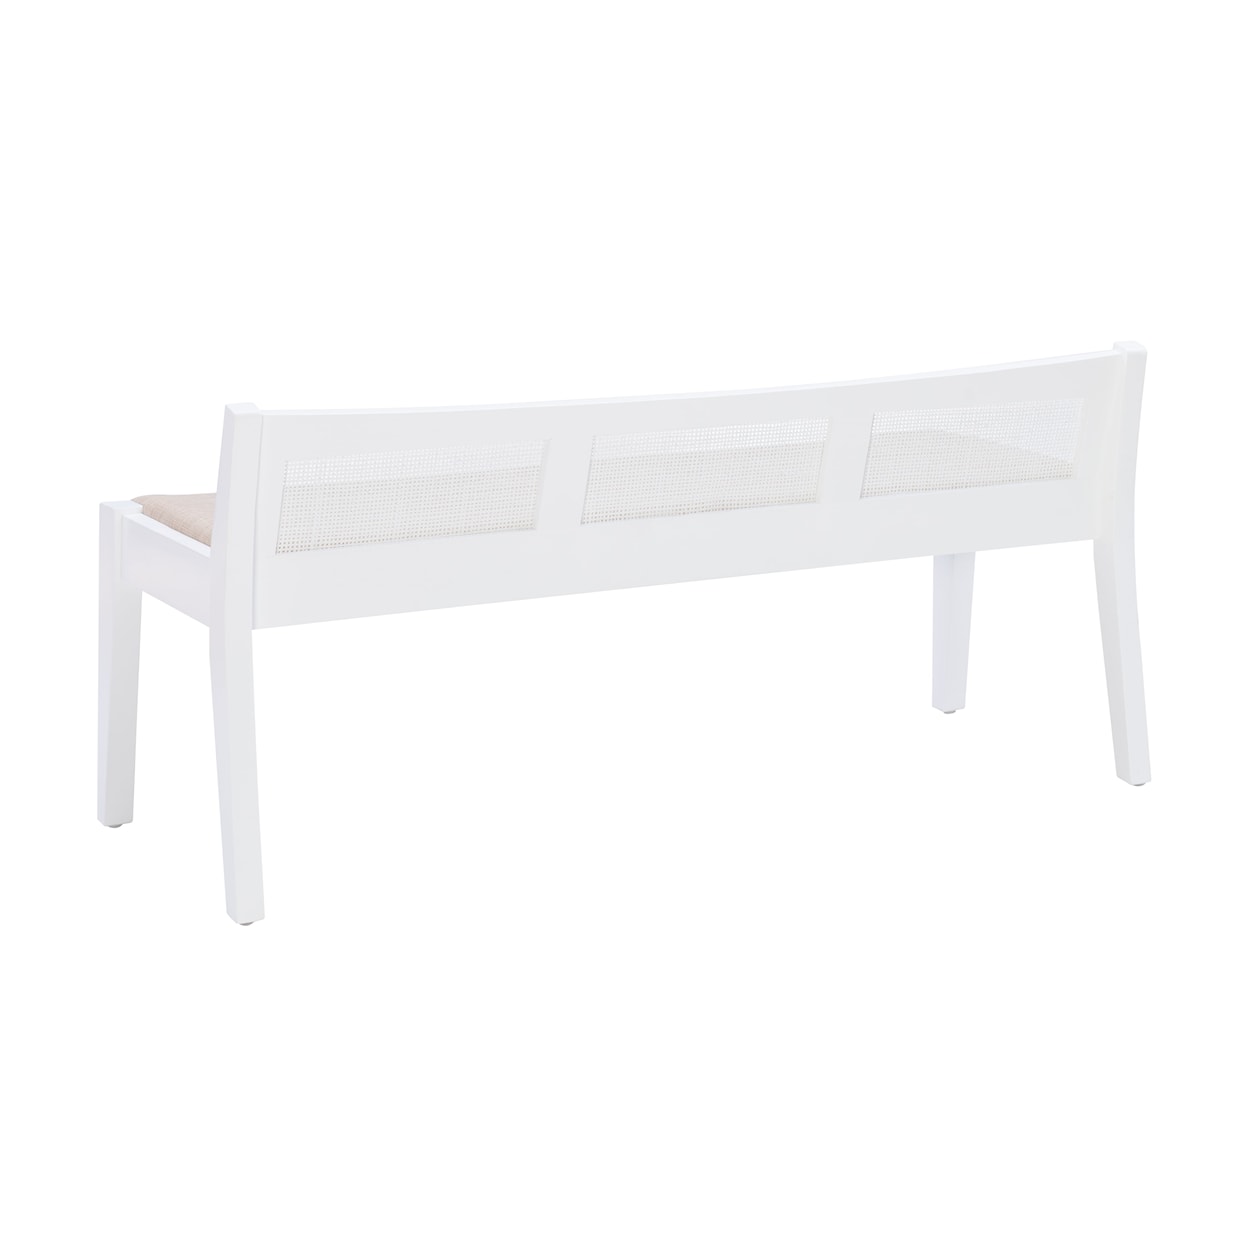 Powell Bauer Upholstered Cane Bench